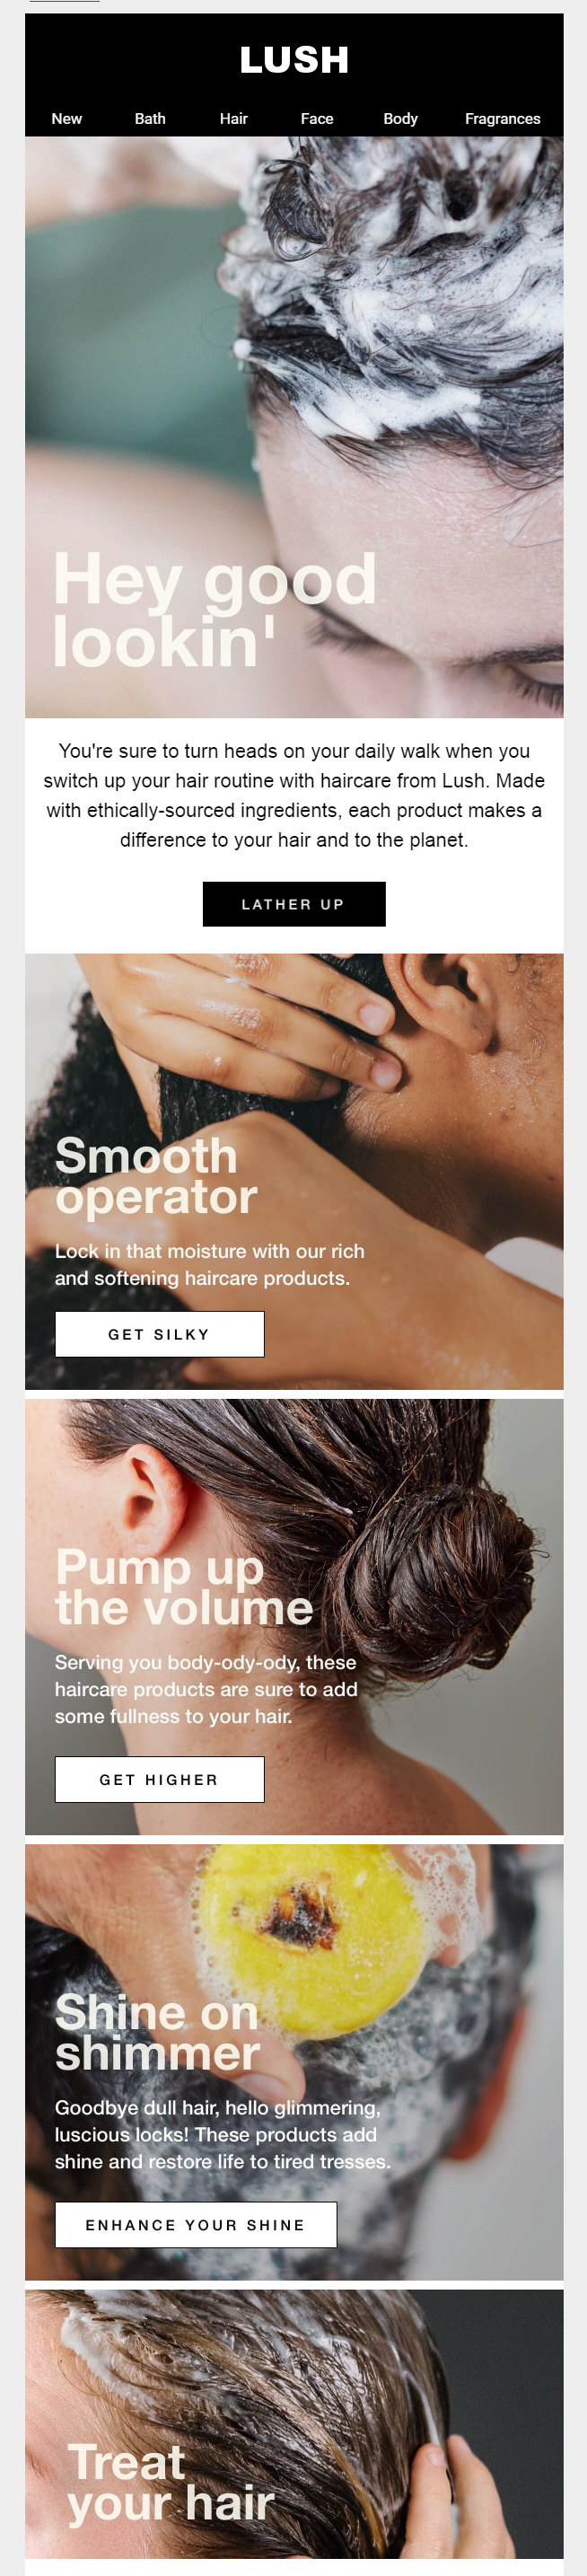 lush example newsletter email